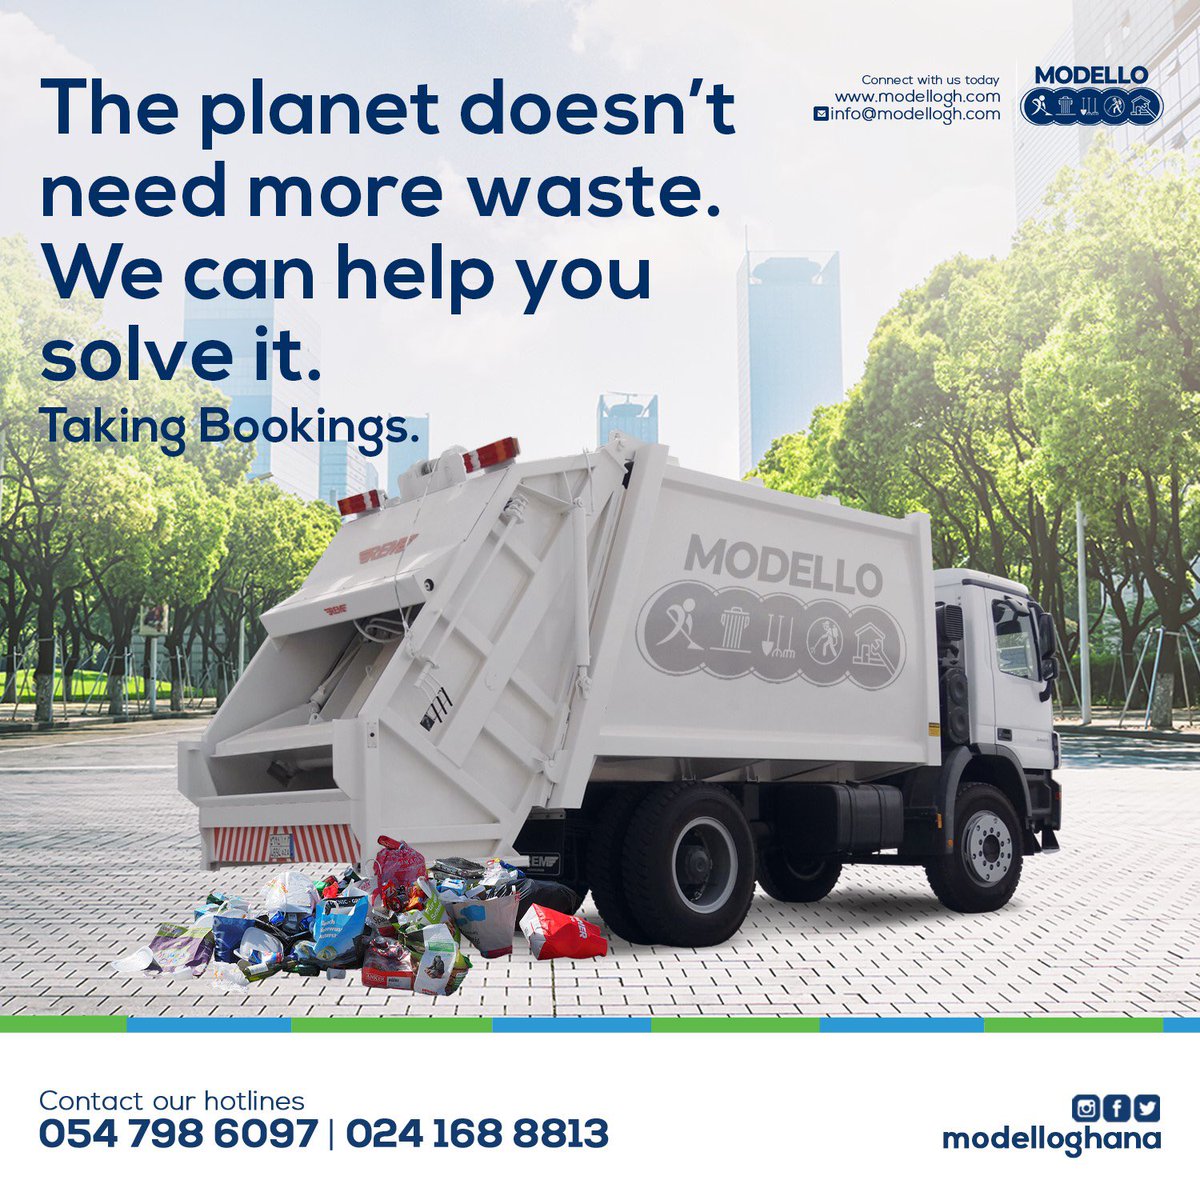 👷🏿‍♂️With the necessary personal protective equipment (PPE), to work safely & effectively. Our services are tailored to meet your exact needs. 
Let’s assist you in making the world a sustainable planet 🌍.
☎️ Contact us for business📗 
#wastemanagementcompany
#commercialwaste